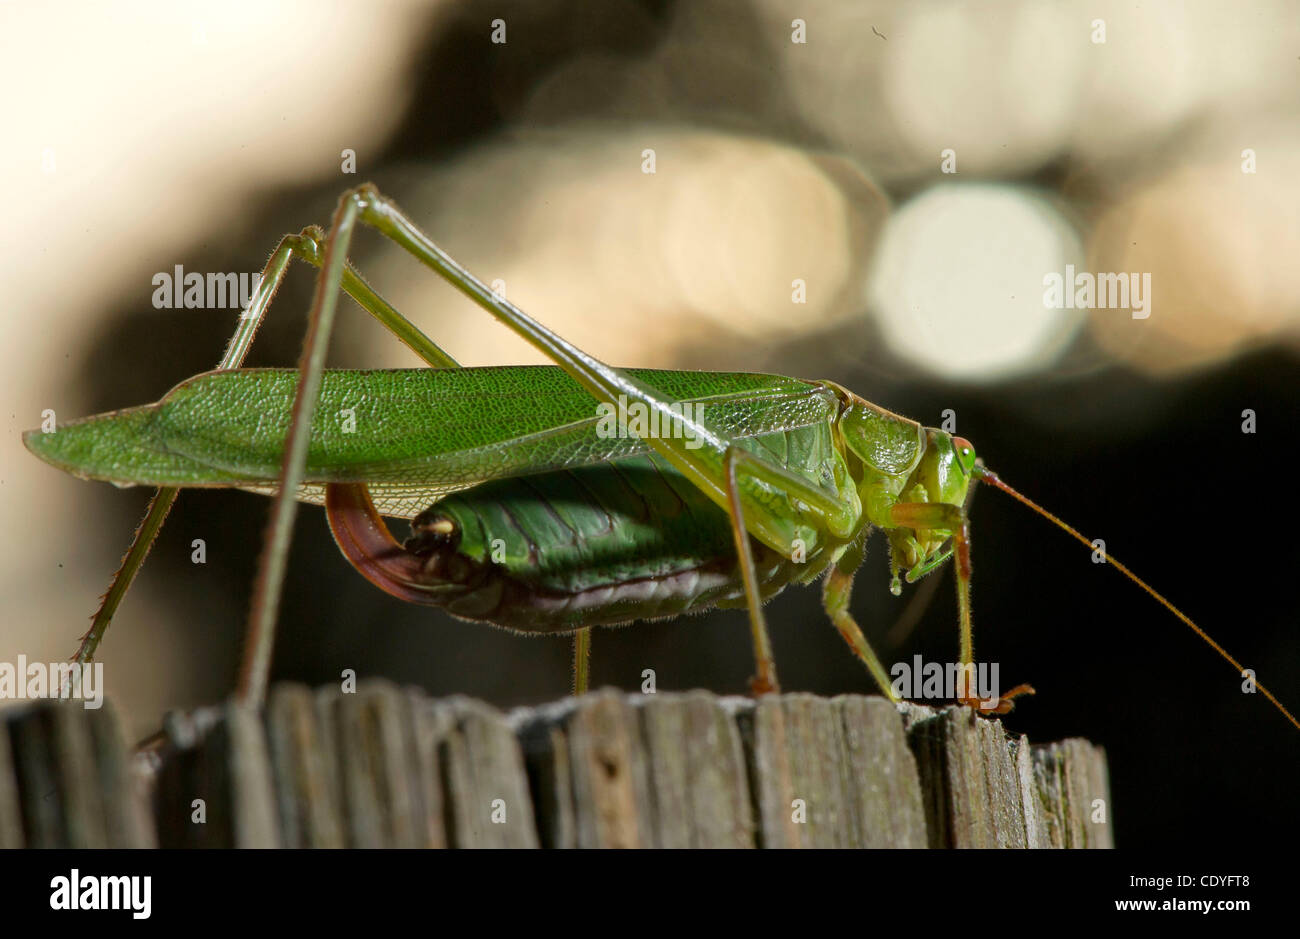 Oct. 11, 2011 - Oakland, Oregon, U.S - A katydid clings to the top of a wooden fencepost along a pasture near Oakland. Katydids, which are also known as long-horned grasshoppers, are actually more closely related to crickets than to grasshoppers. In England they are known as bush crickets. (Credit I Stock Photo